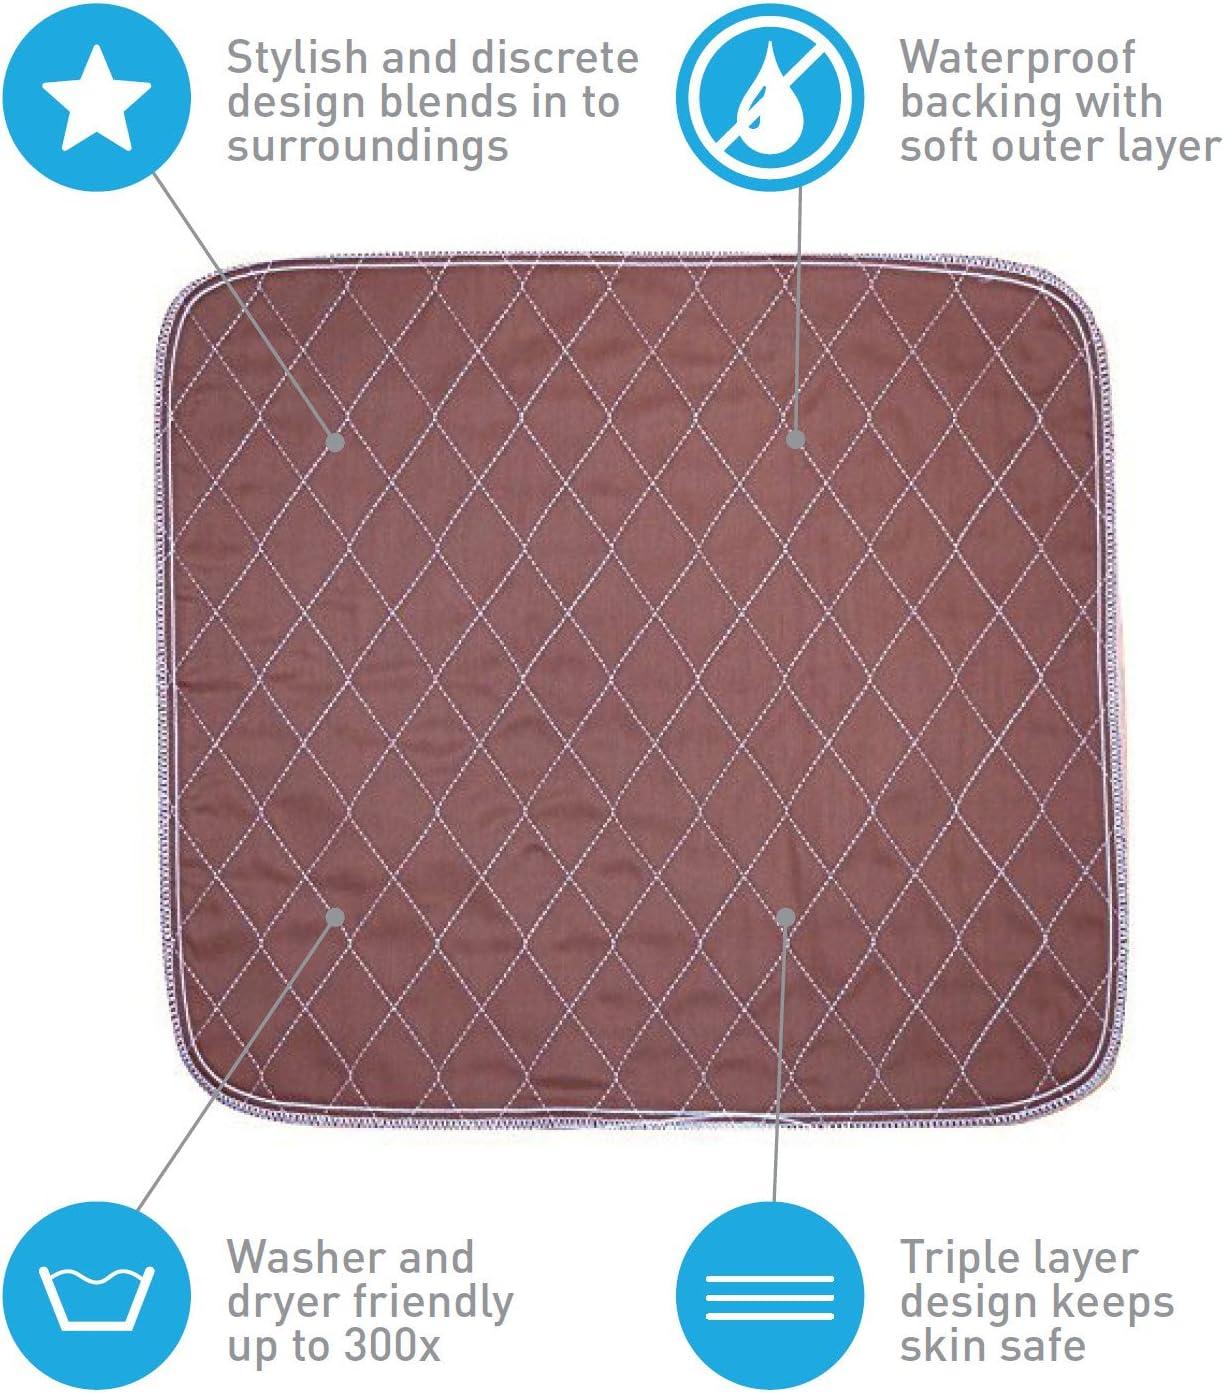 CareActive Quilted Waterproof Incontinence Seat Pad : protects